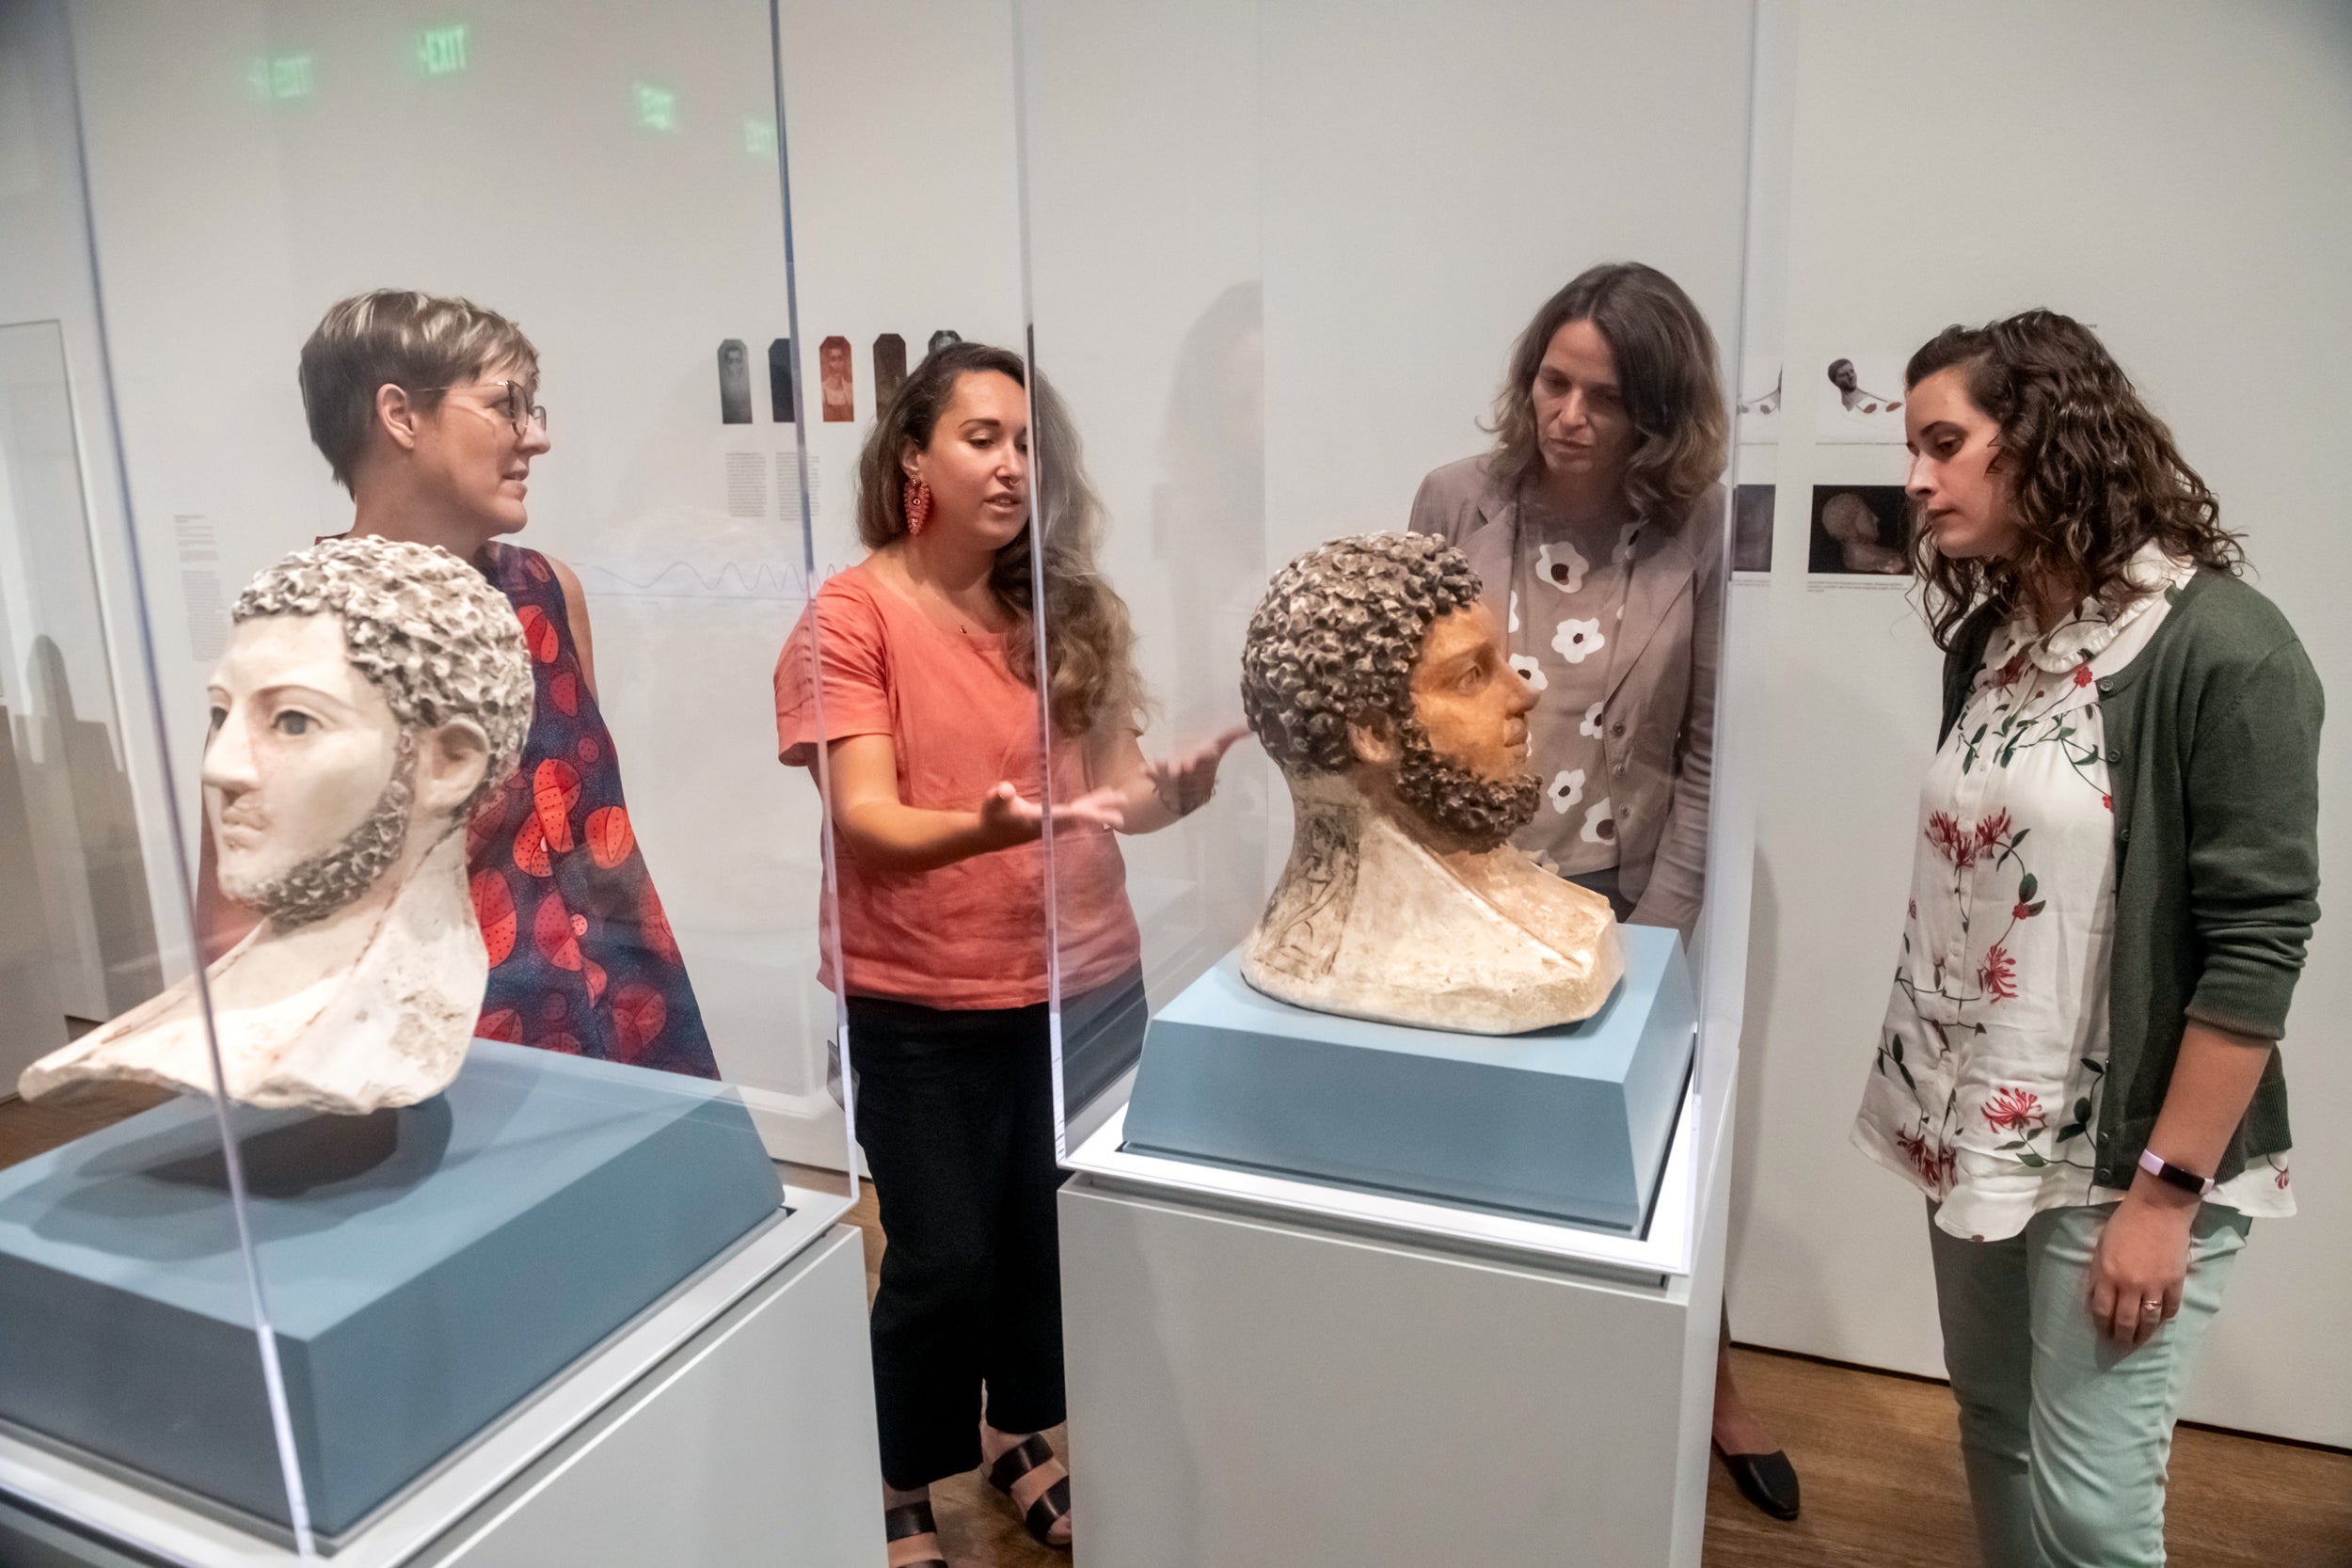 Curators Kate Smith, Jen Thum, Susanne Ebbinghaus, and Georgina Rayner with funerary masks displayed in glass cases.